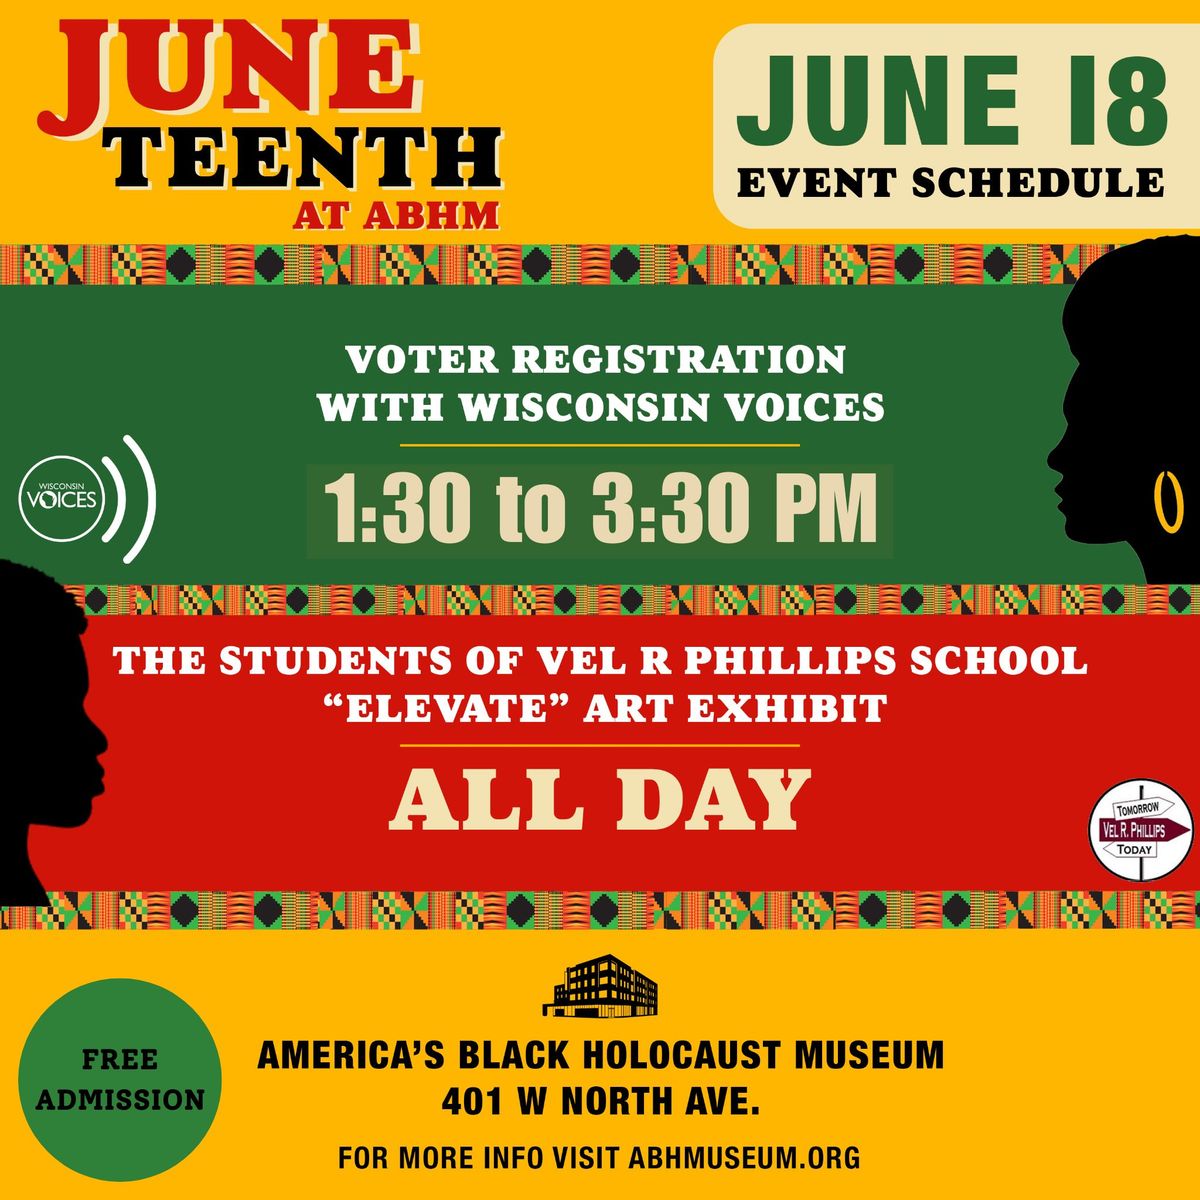 JUNETEENTH EVENT: Voter Registration at ABHM with Wisconsin Voices